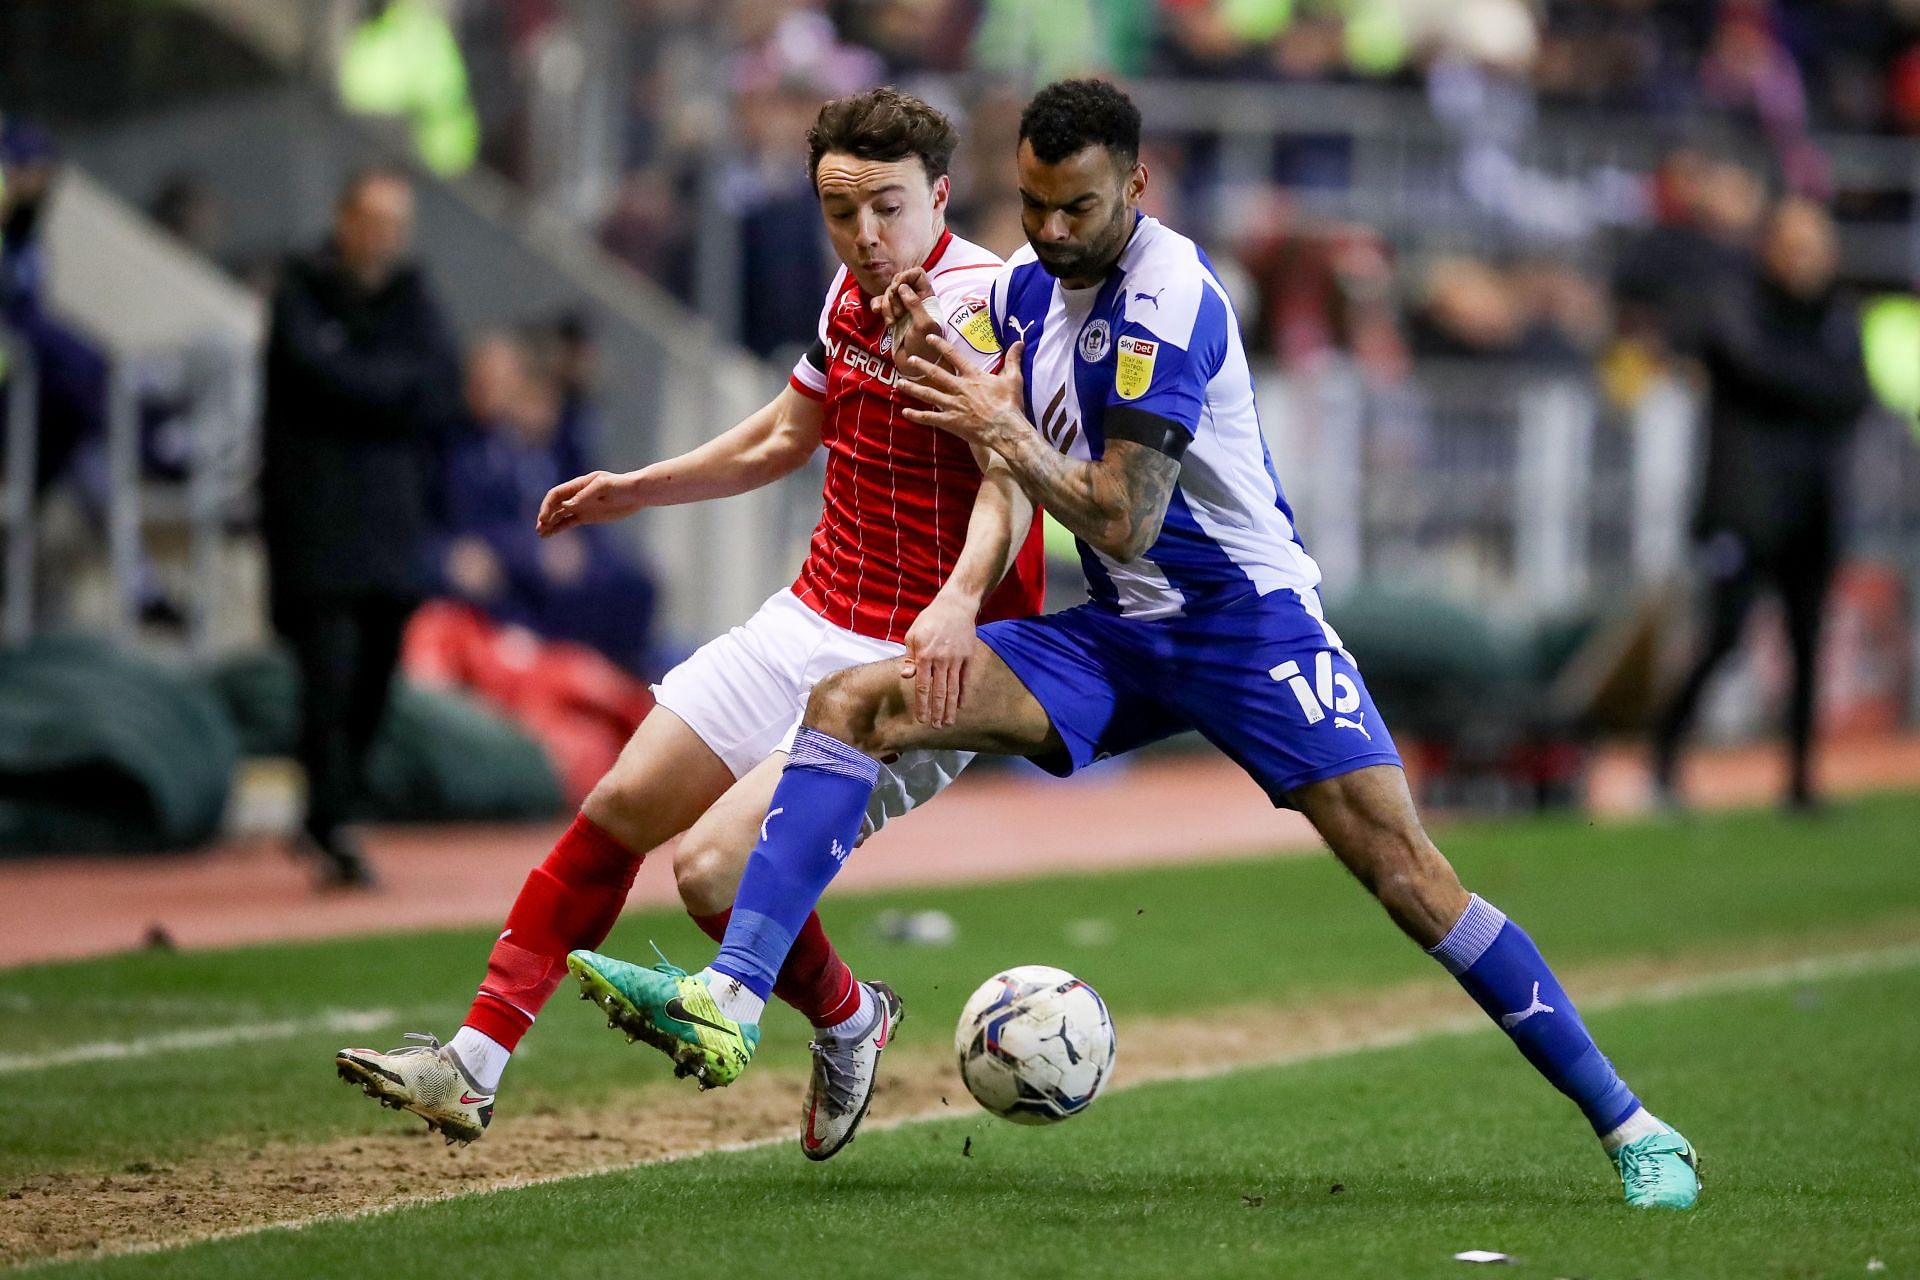 Rotherham United v Wigan Athletic - Sky Bet League One